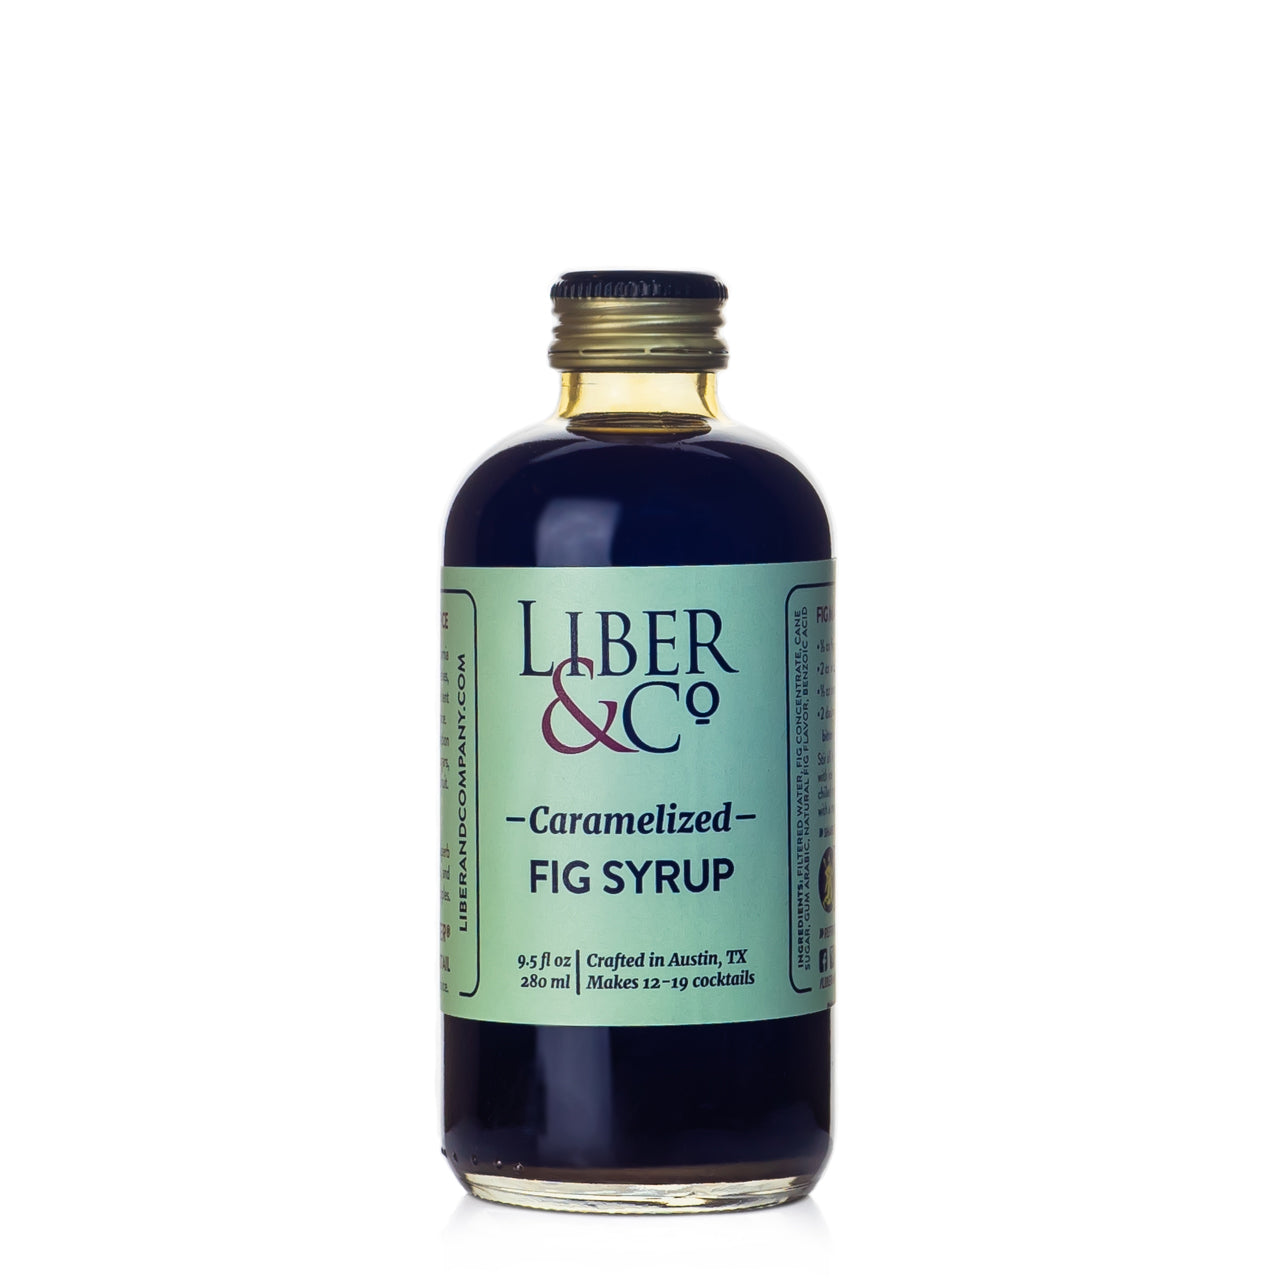 Liber & Co Caramelized Fig Syrup